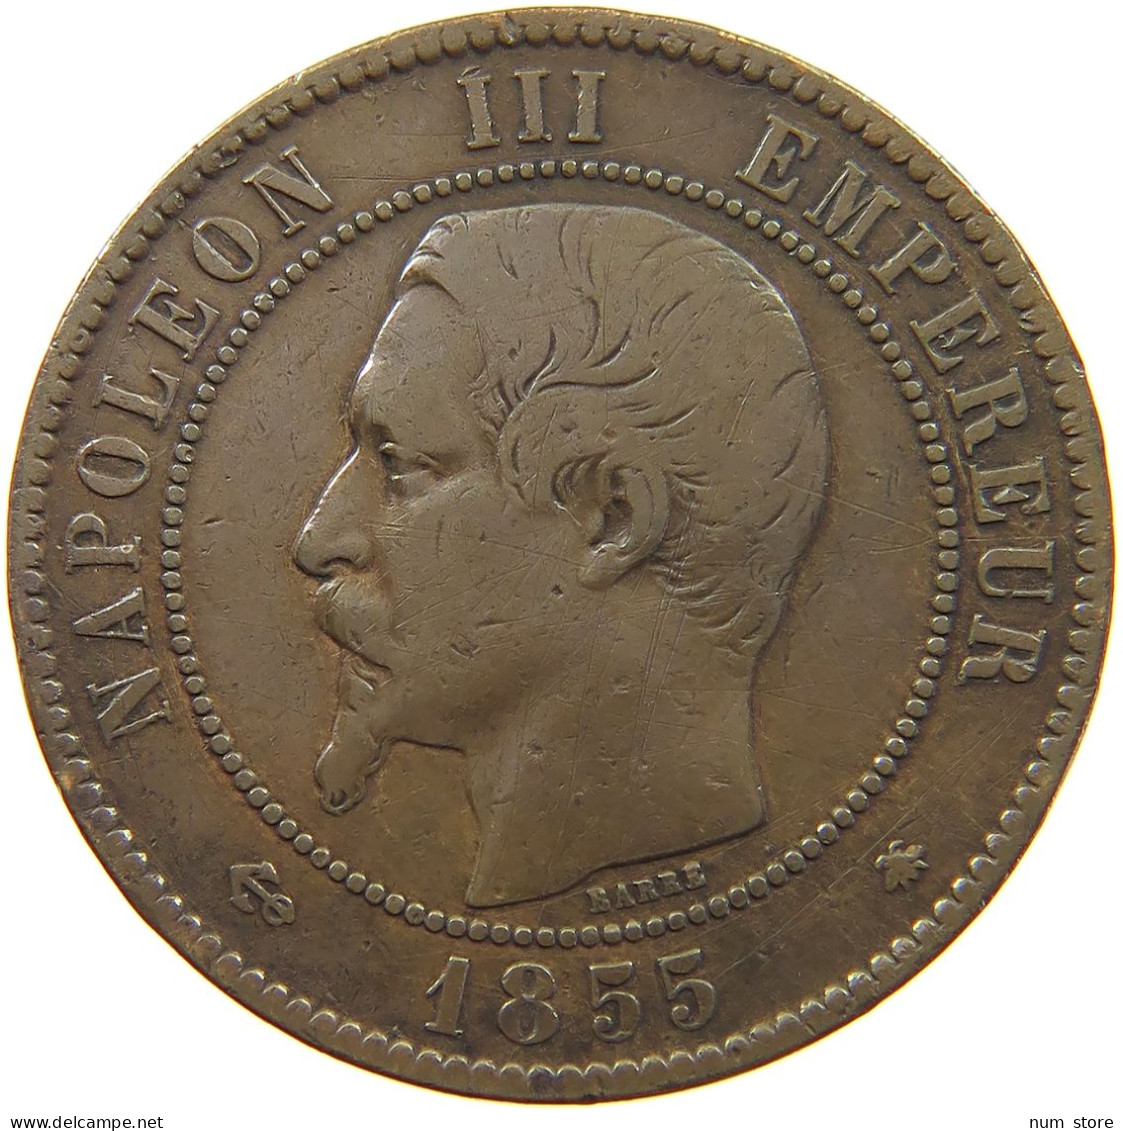 FRANCE 10 CENTIMES 1855 BB #a059 0359 - 10 Centimes